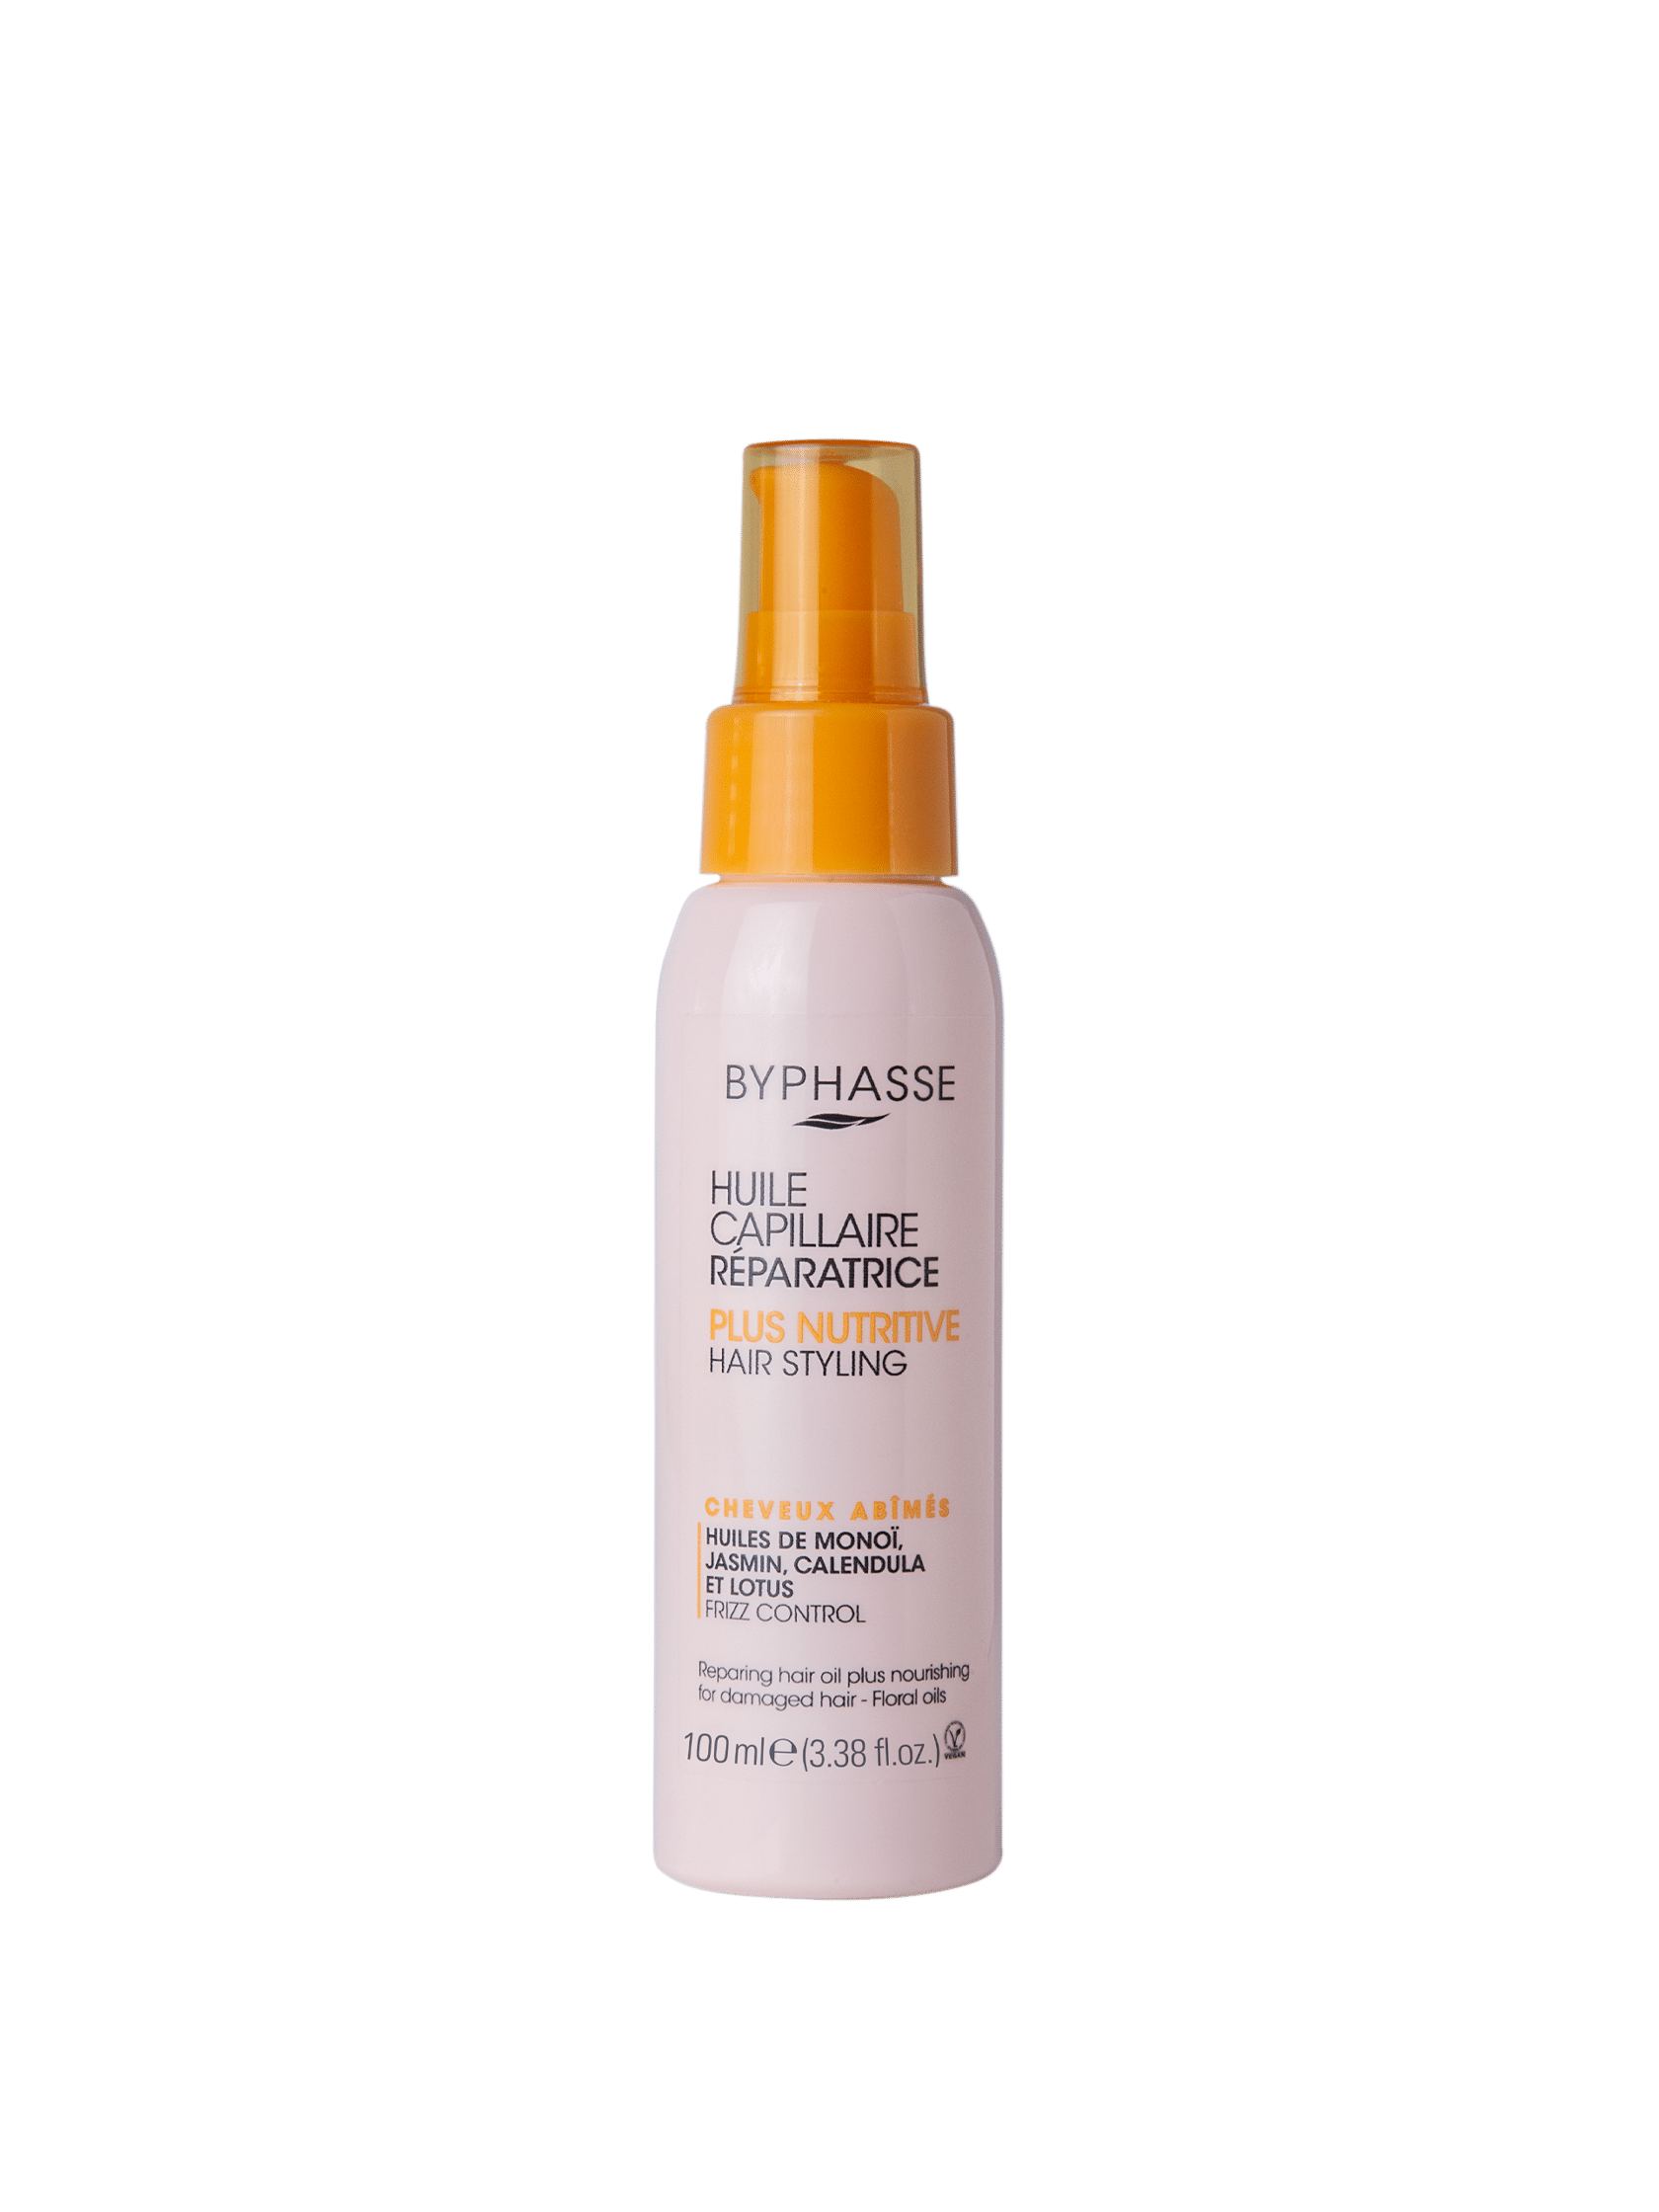 HUILE RÉPARATRICE 100ML product_image